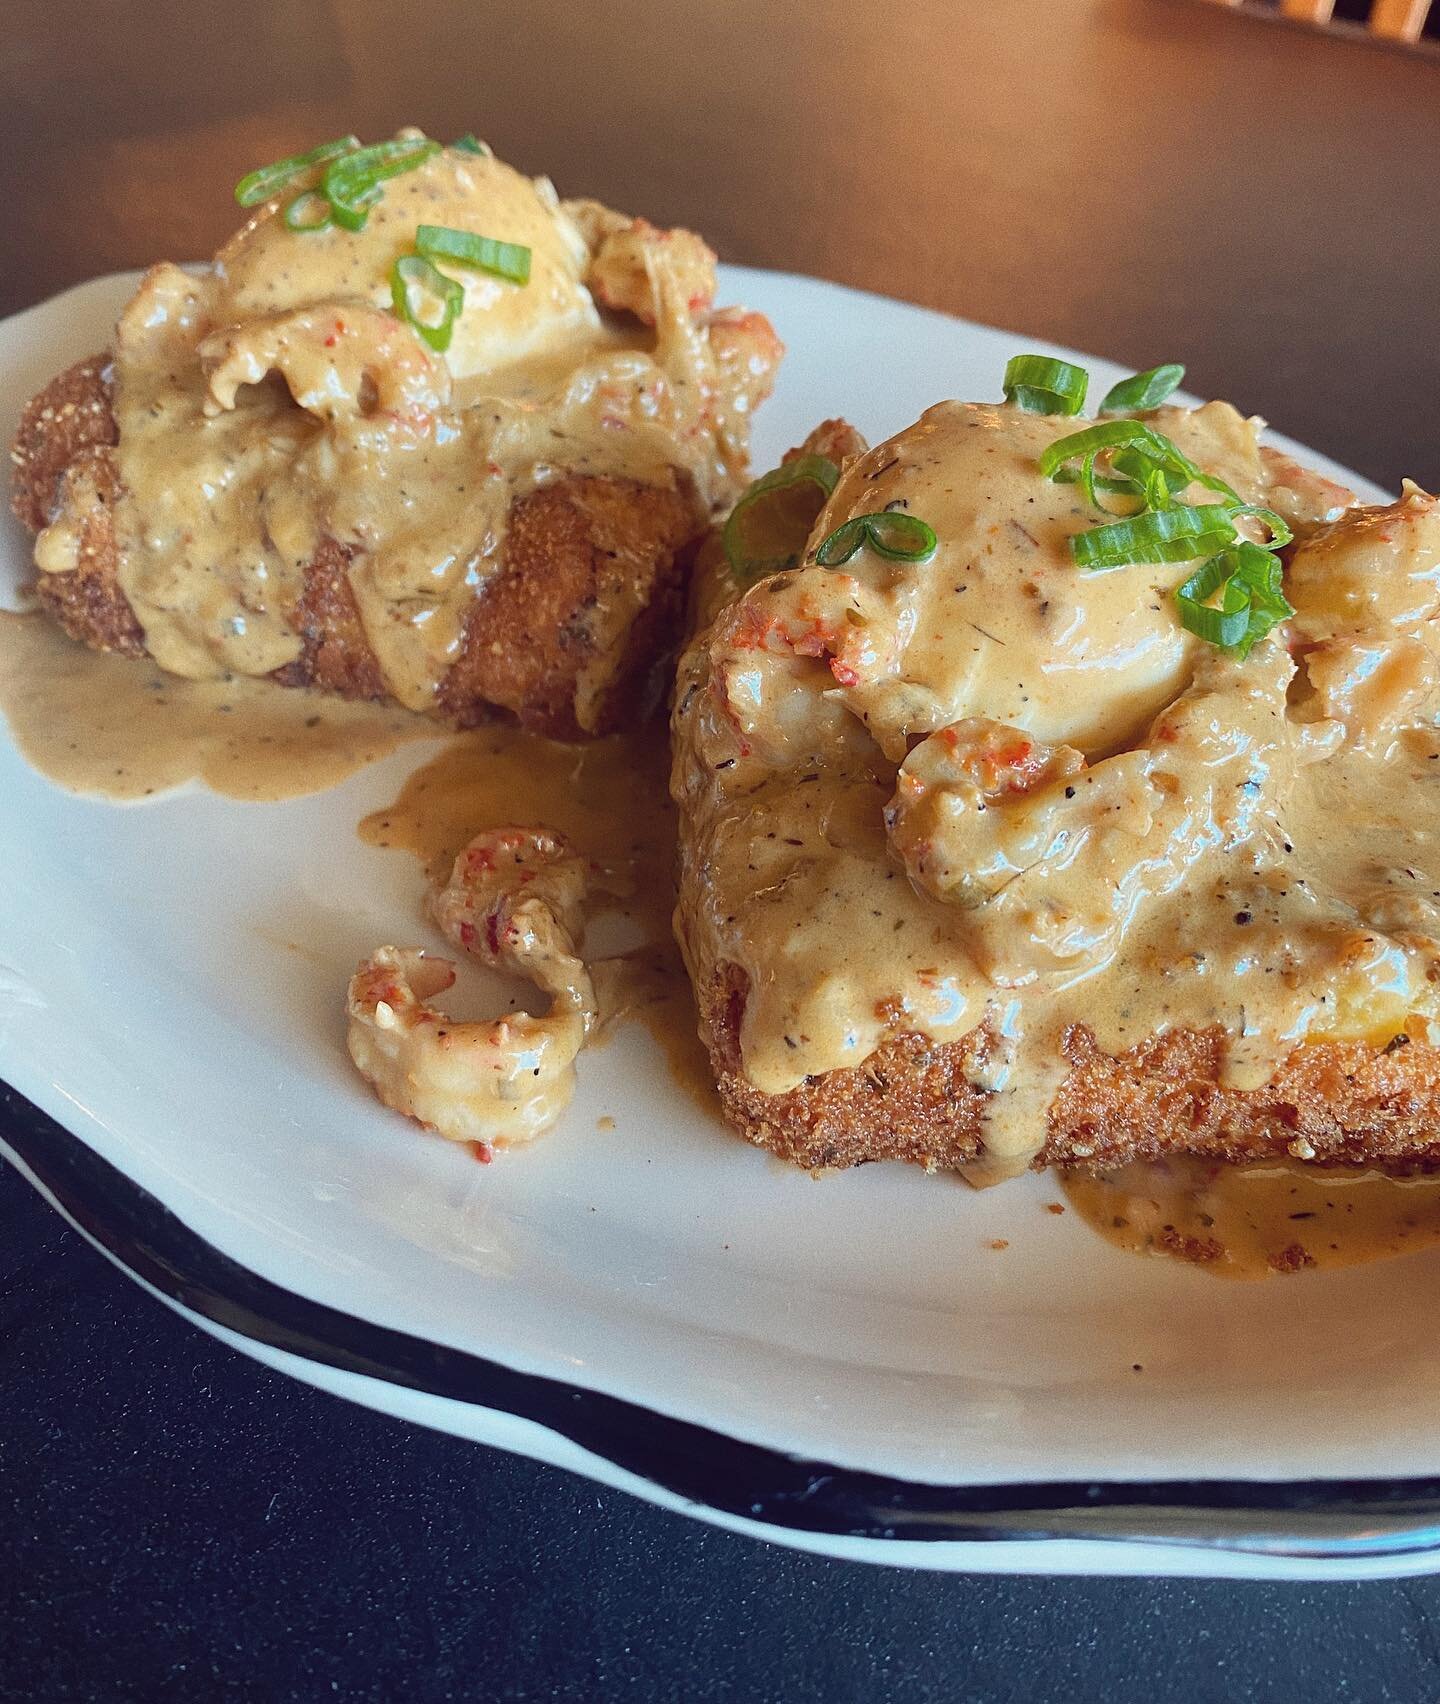 Our Sunday special is the Crawfish Monica Benedict! Two cheddar grit cakes topped with poached eggs and Louisiana crawfish in a sherry cream sauce!